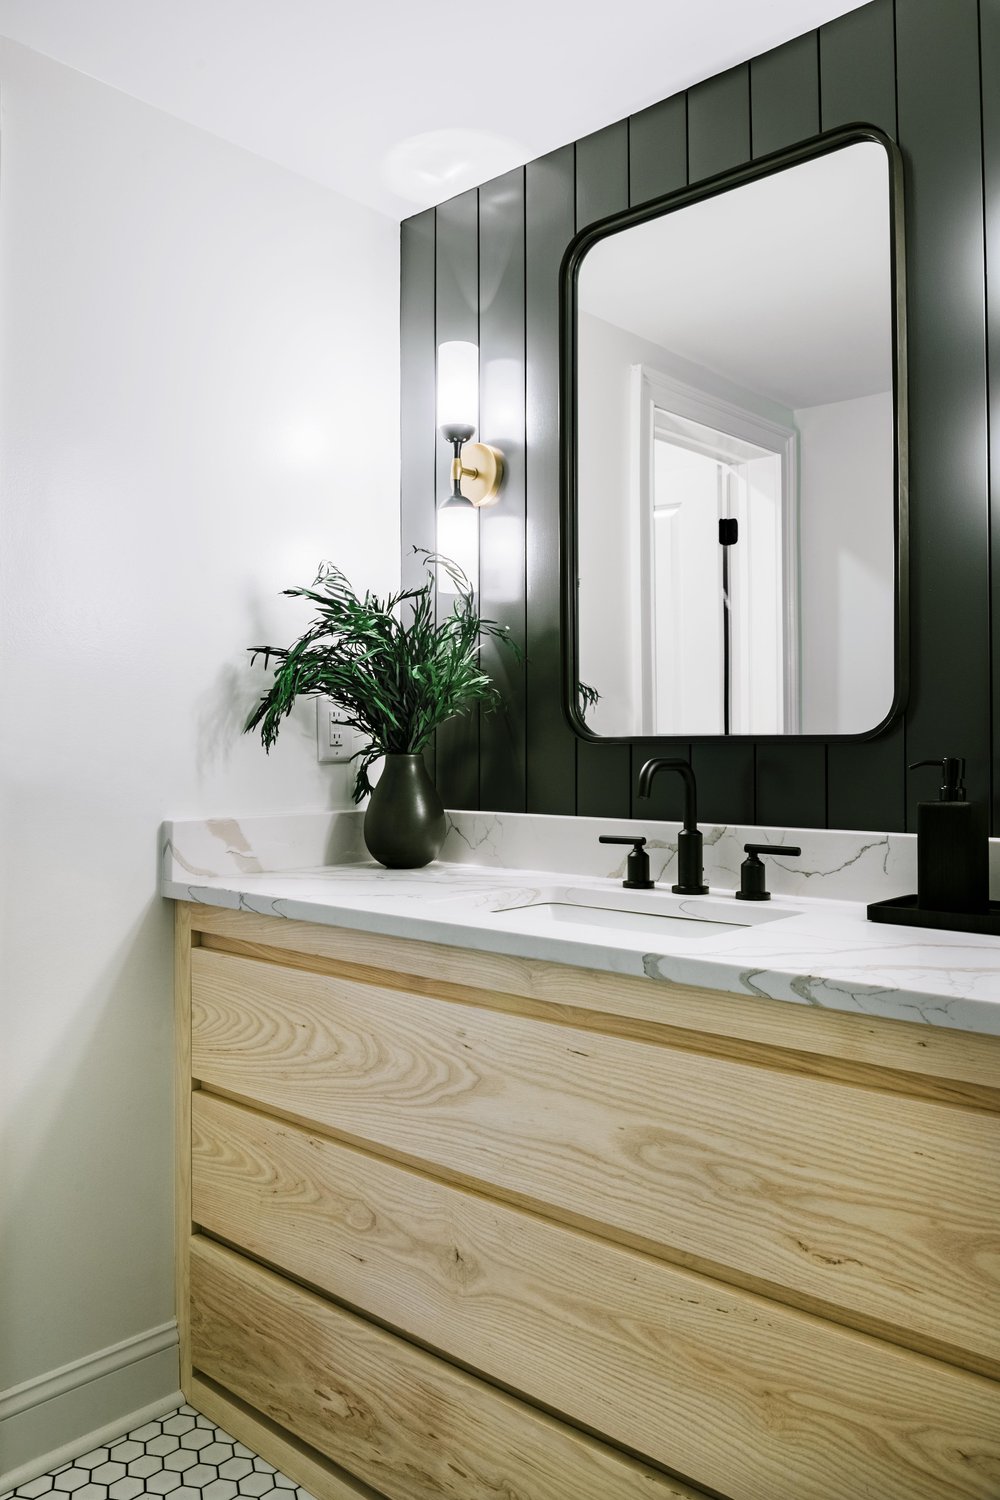 Get creative with modern sconces